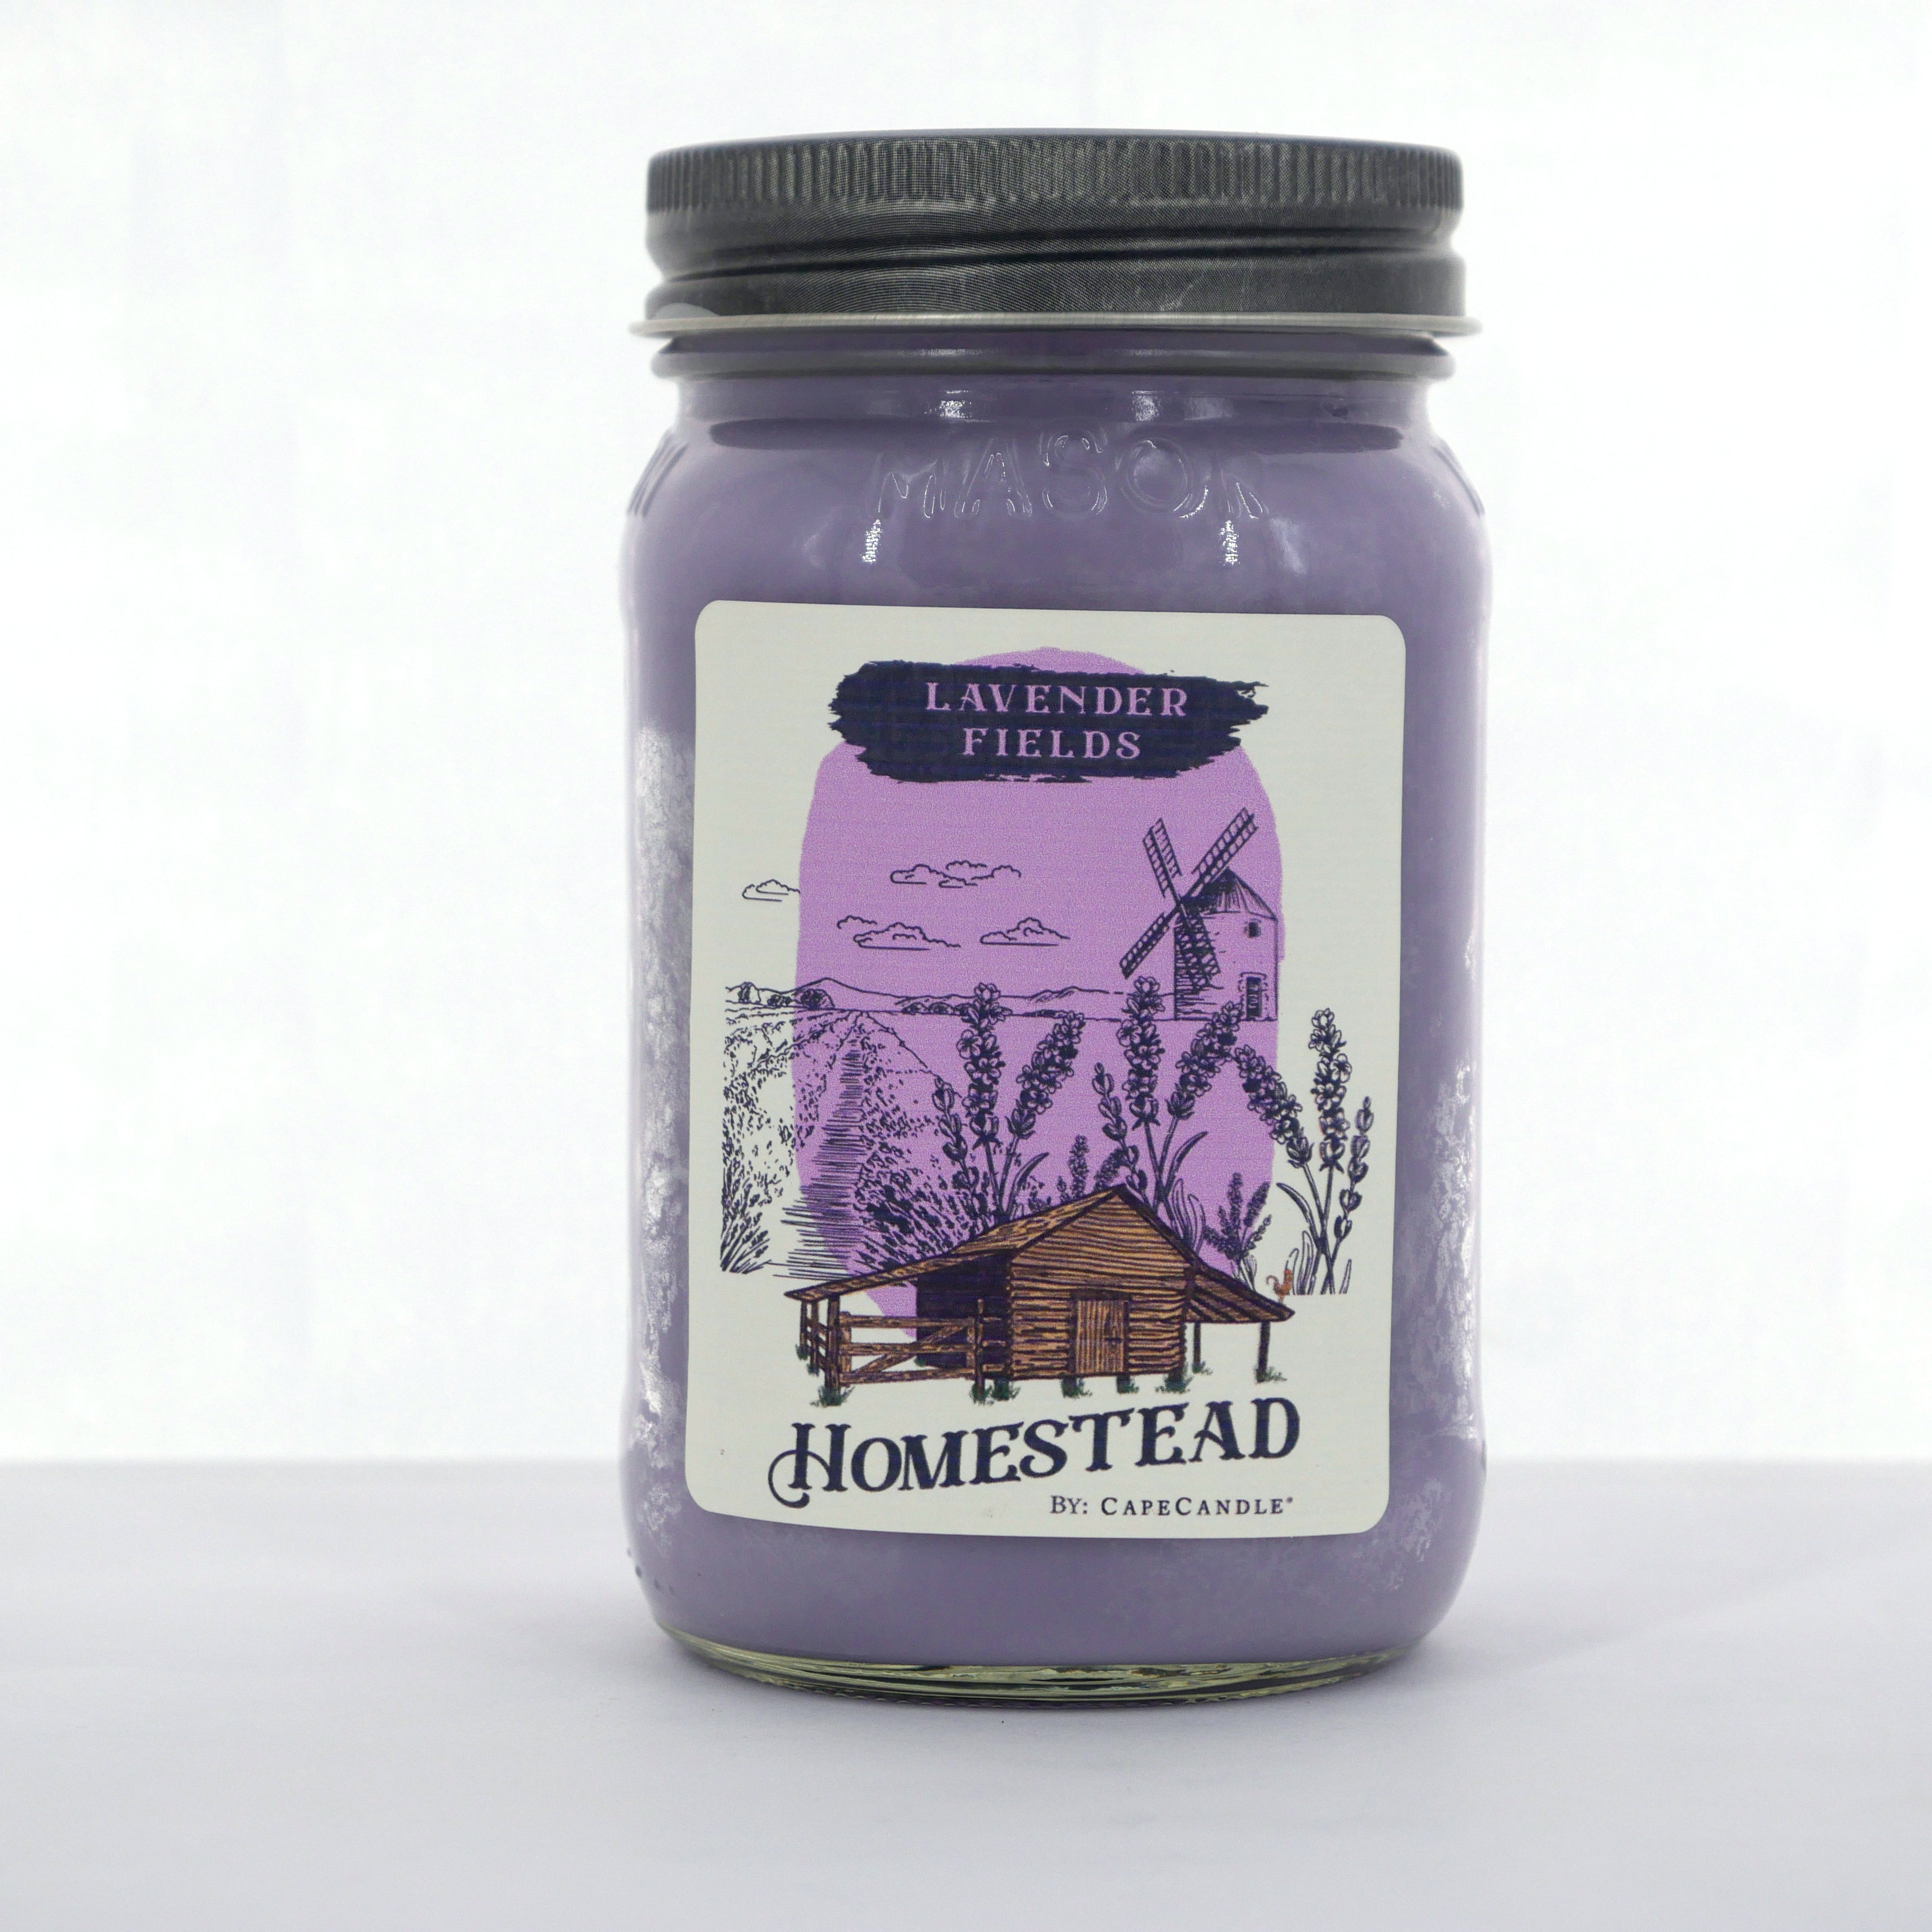 Lavender Fields Soy Candle 16oz Homestead Mason Jar by Cape Candle